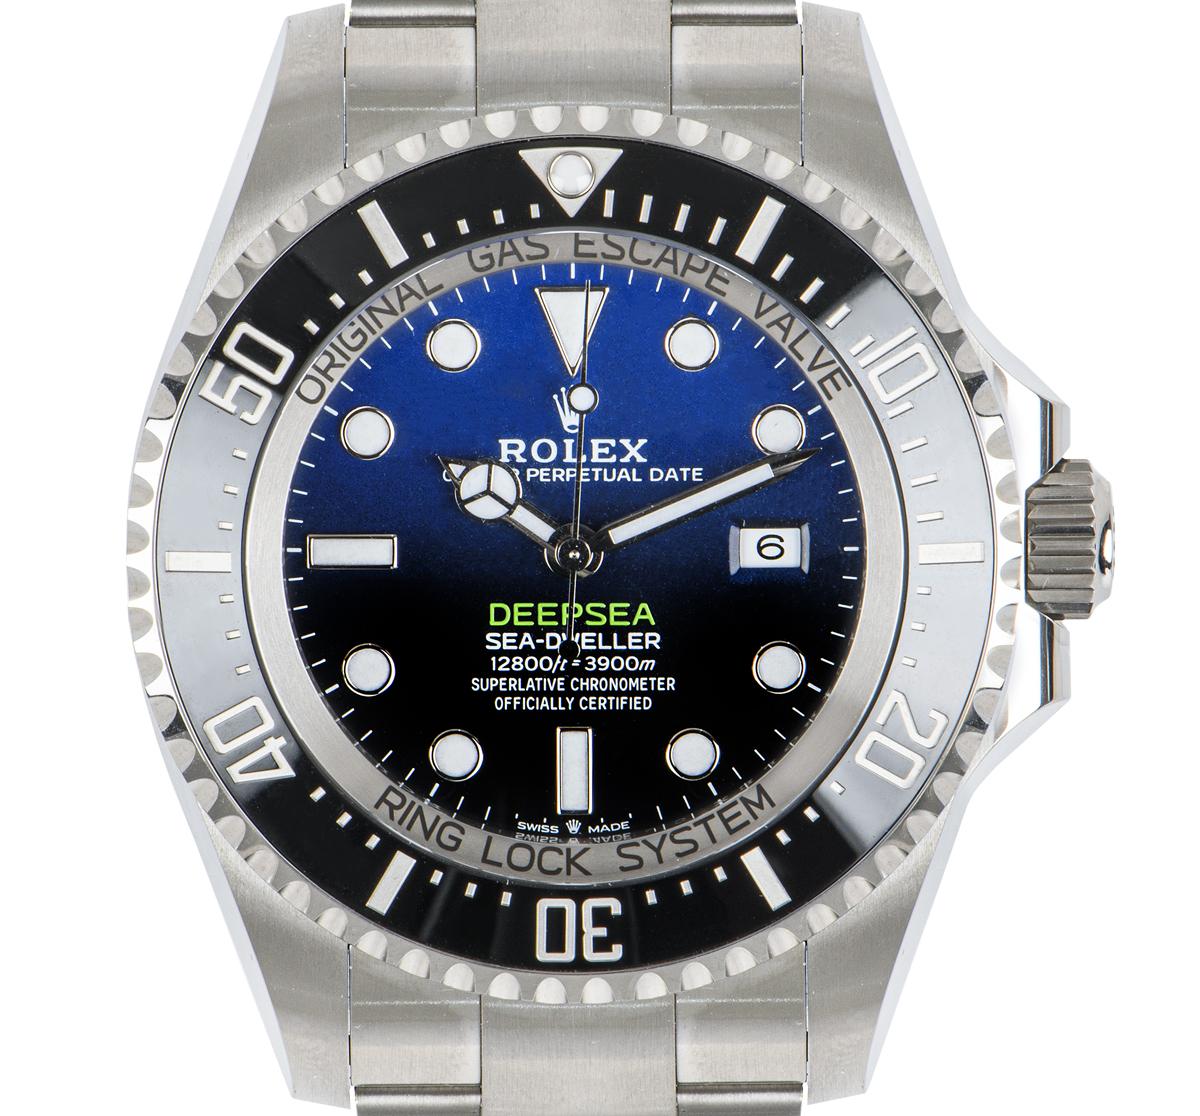 An unworn Deepsea Sea-Dweller in Oystersteel by Rolex, featuring a D-Blue dial under a domed scratch resistant sapphire crystal. The stainless steel uni-directional rotatable bezel features a ceramic insert with platinum coated 60 minute